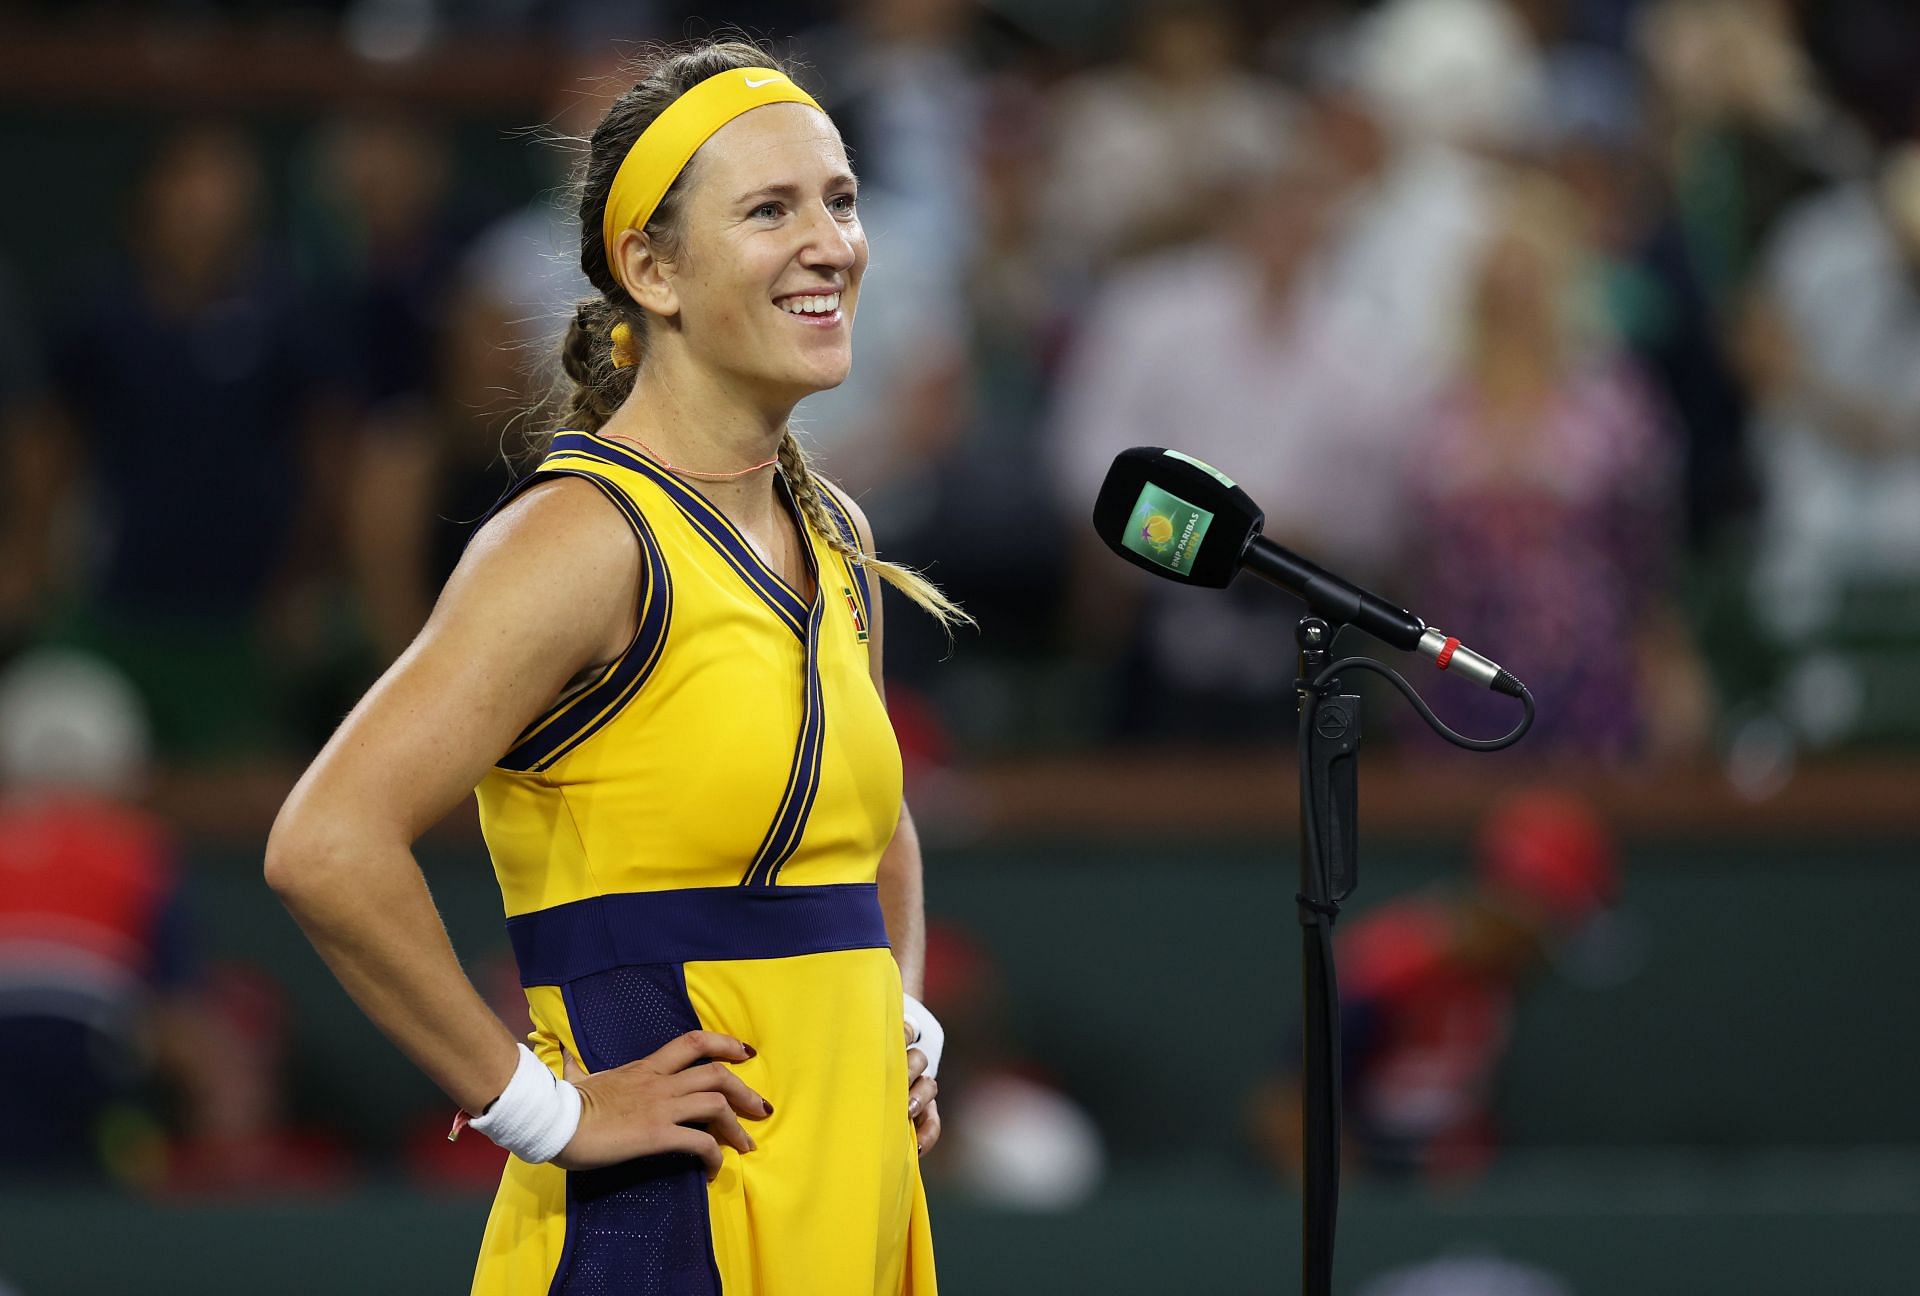 Victoria Azarenka after her semifinal win at the BNP Paribas Open on Friday